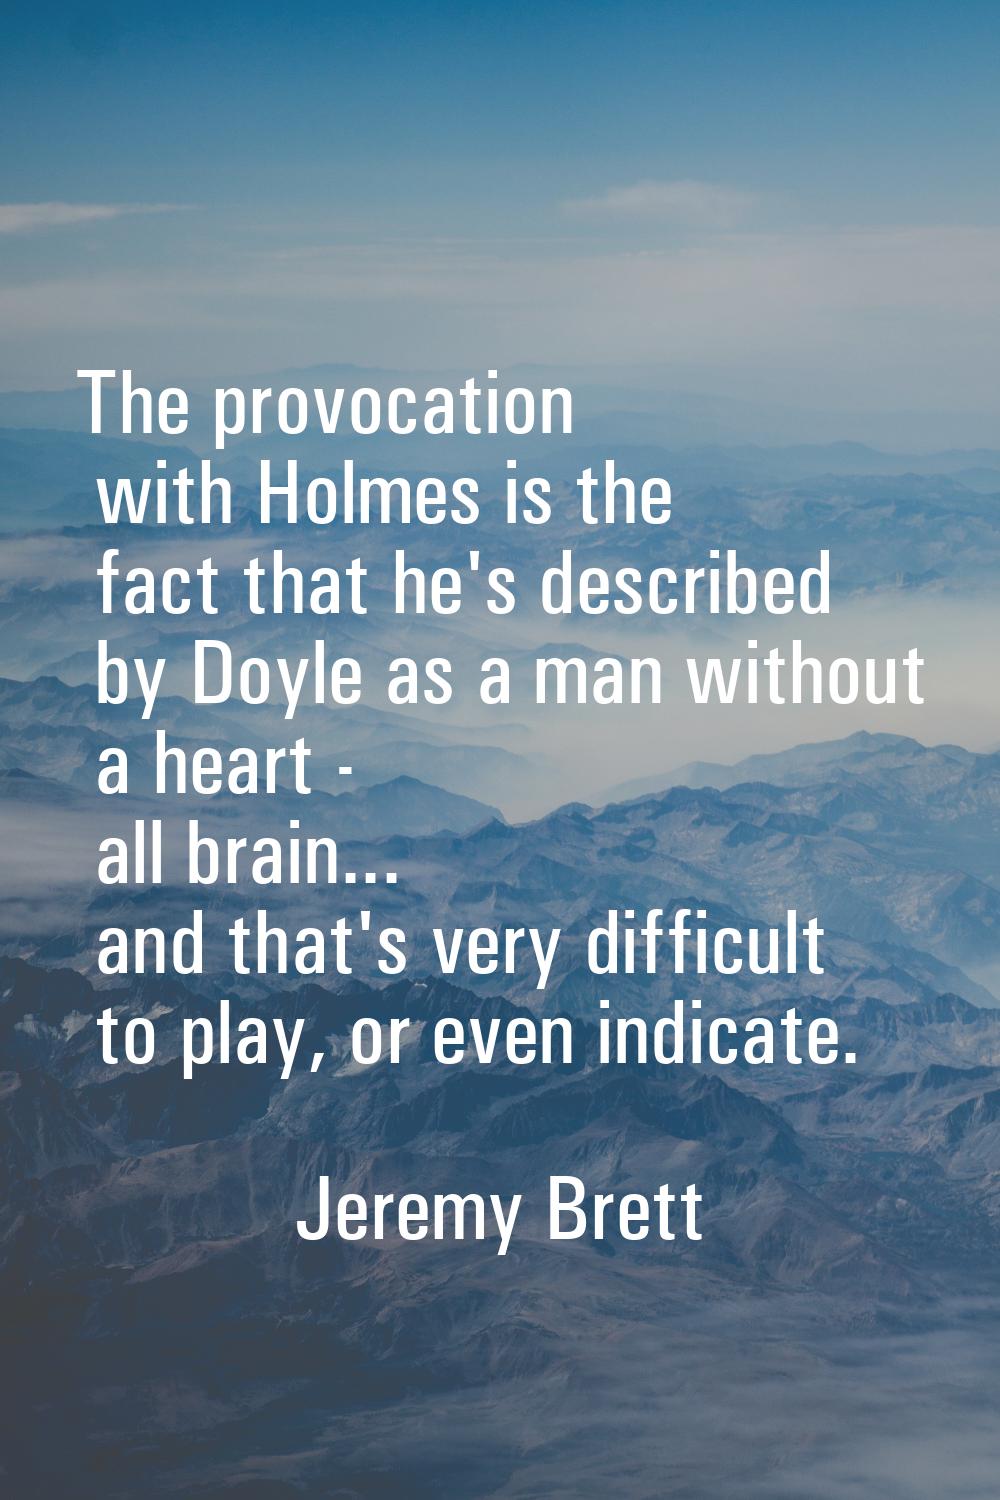 The provocation with Holmes is the fact that he's described by Doyle as a man without a heart - all